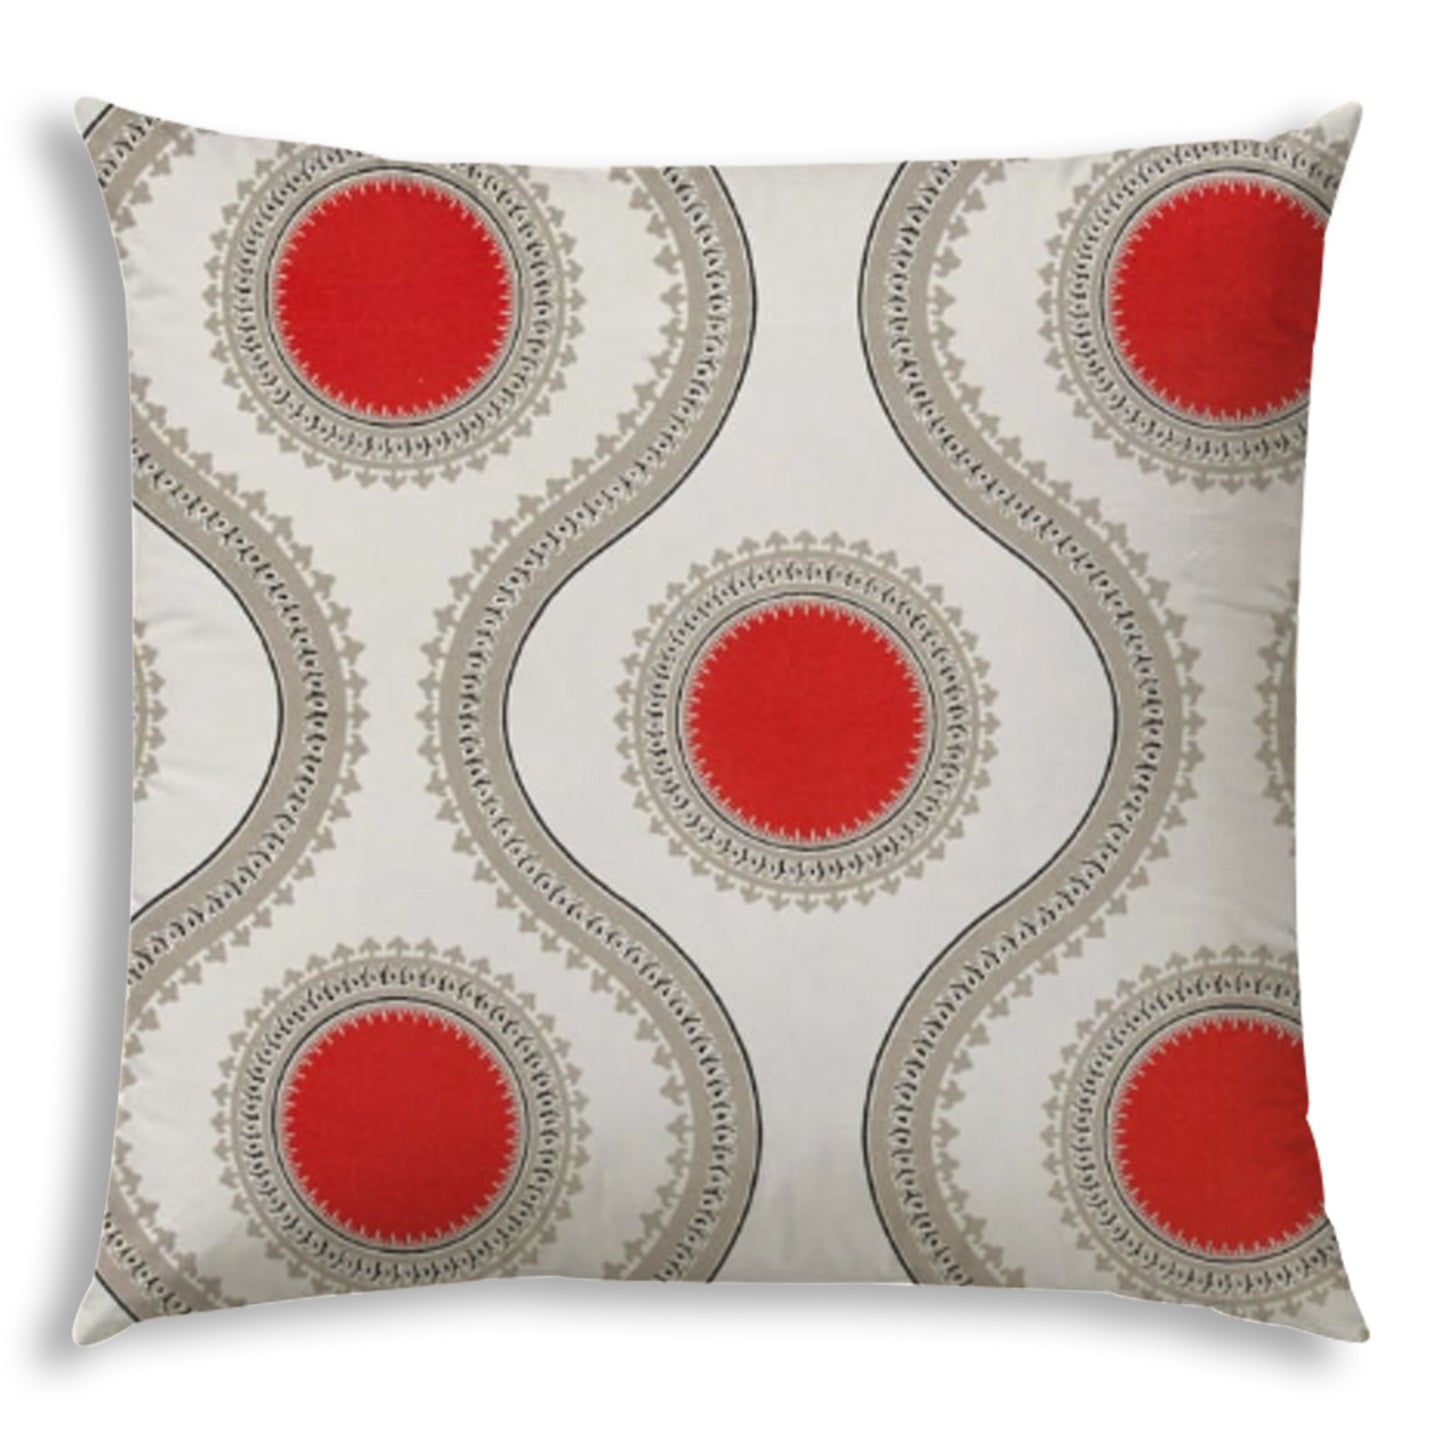 KISSIMMEE Indoor/Outdoor Pillow - Sewn Closure